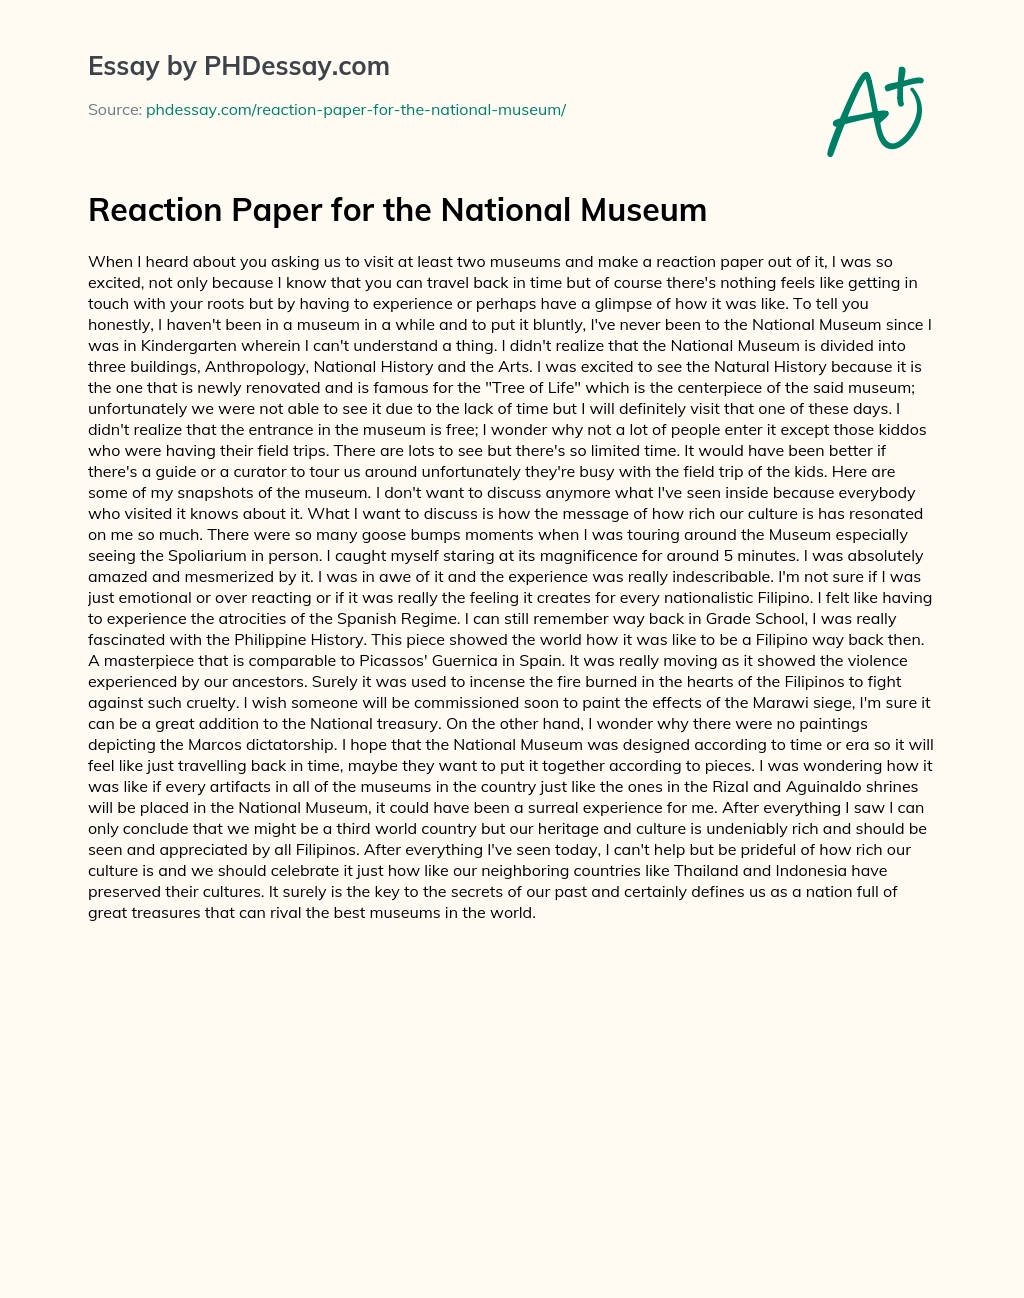 Reaction Paper for the National Museum essay